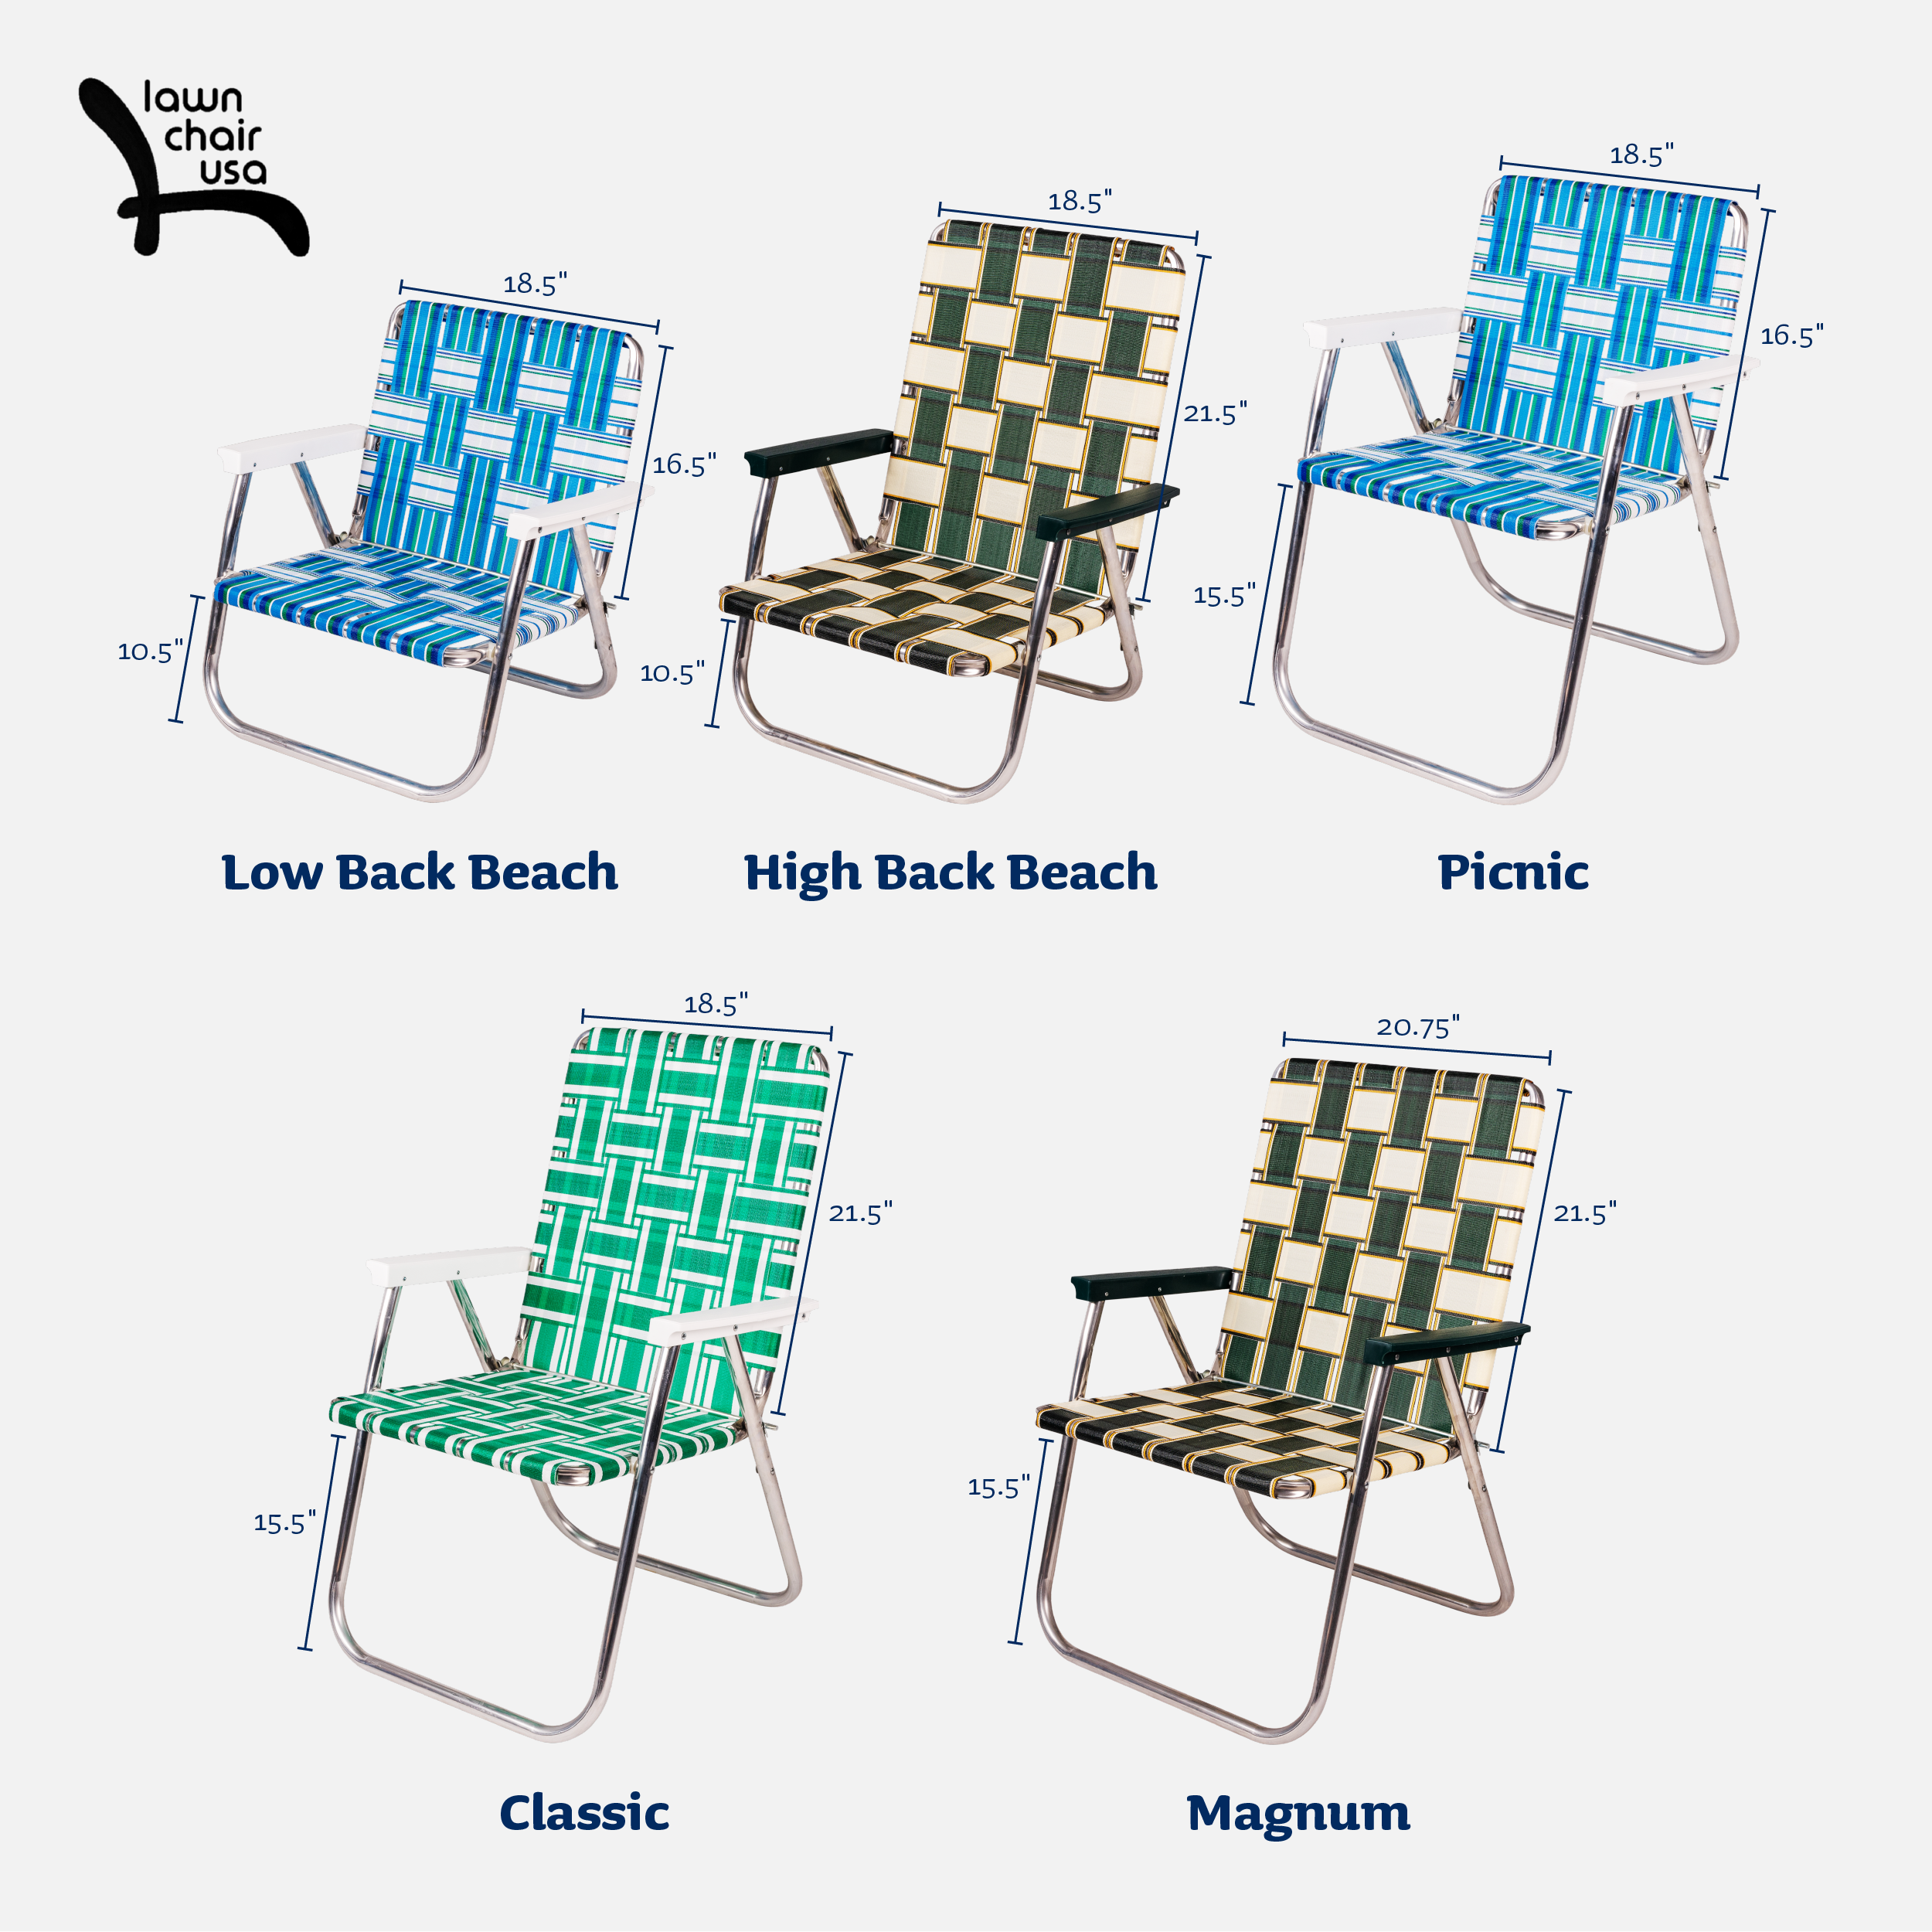 Lawn Chair USA Classic Folding Aluminum Webbed Chair | Blue/ White with White Arms - image 4 of 7